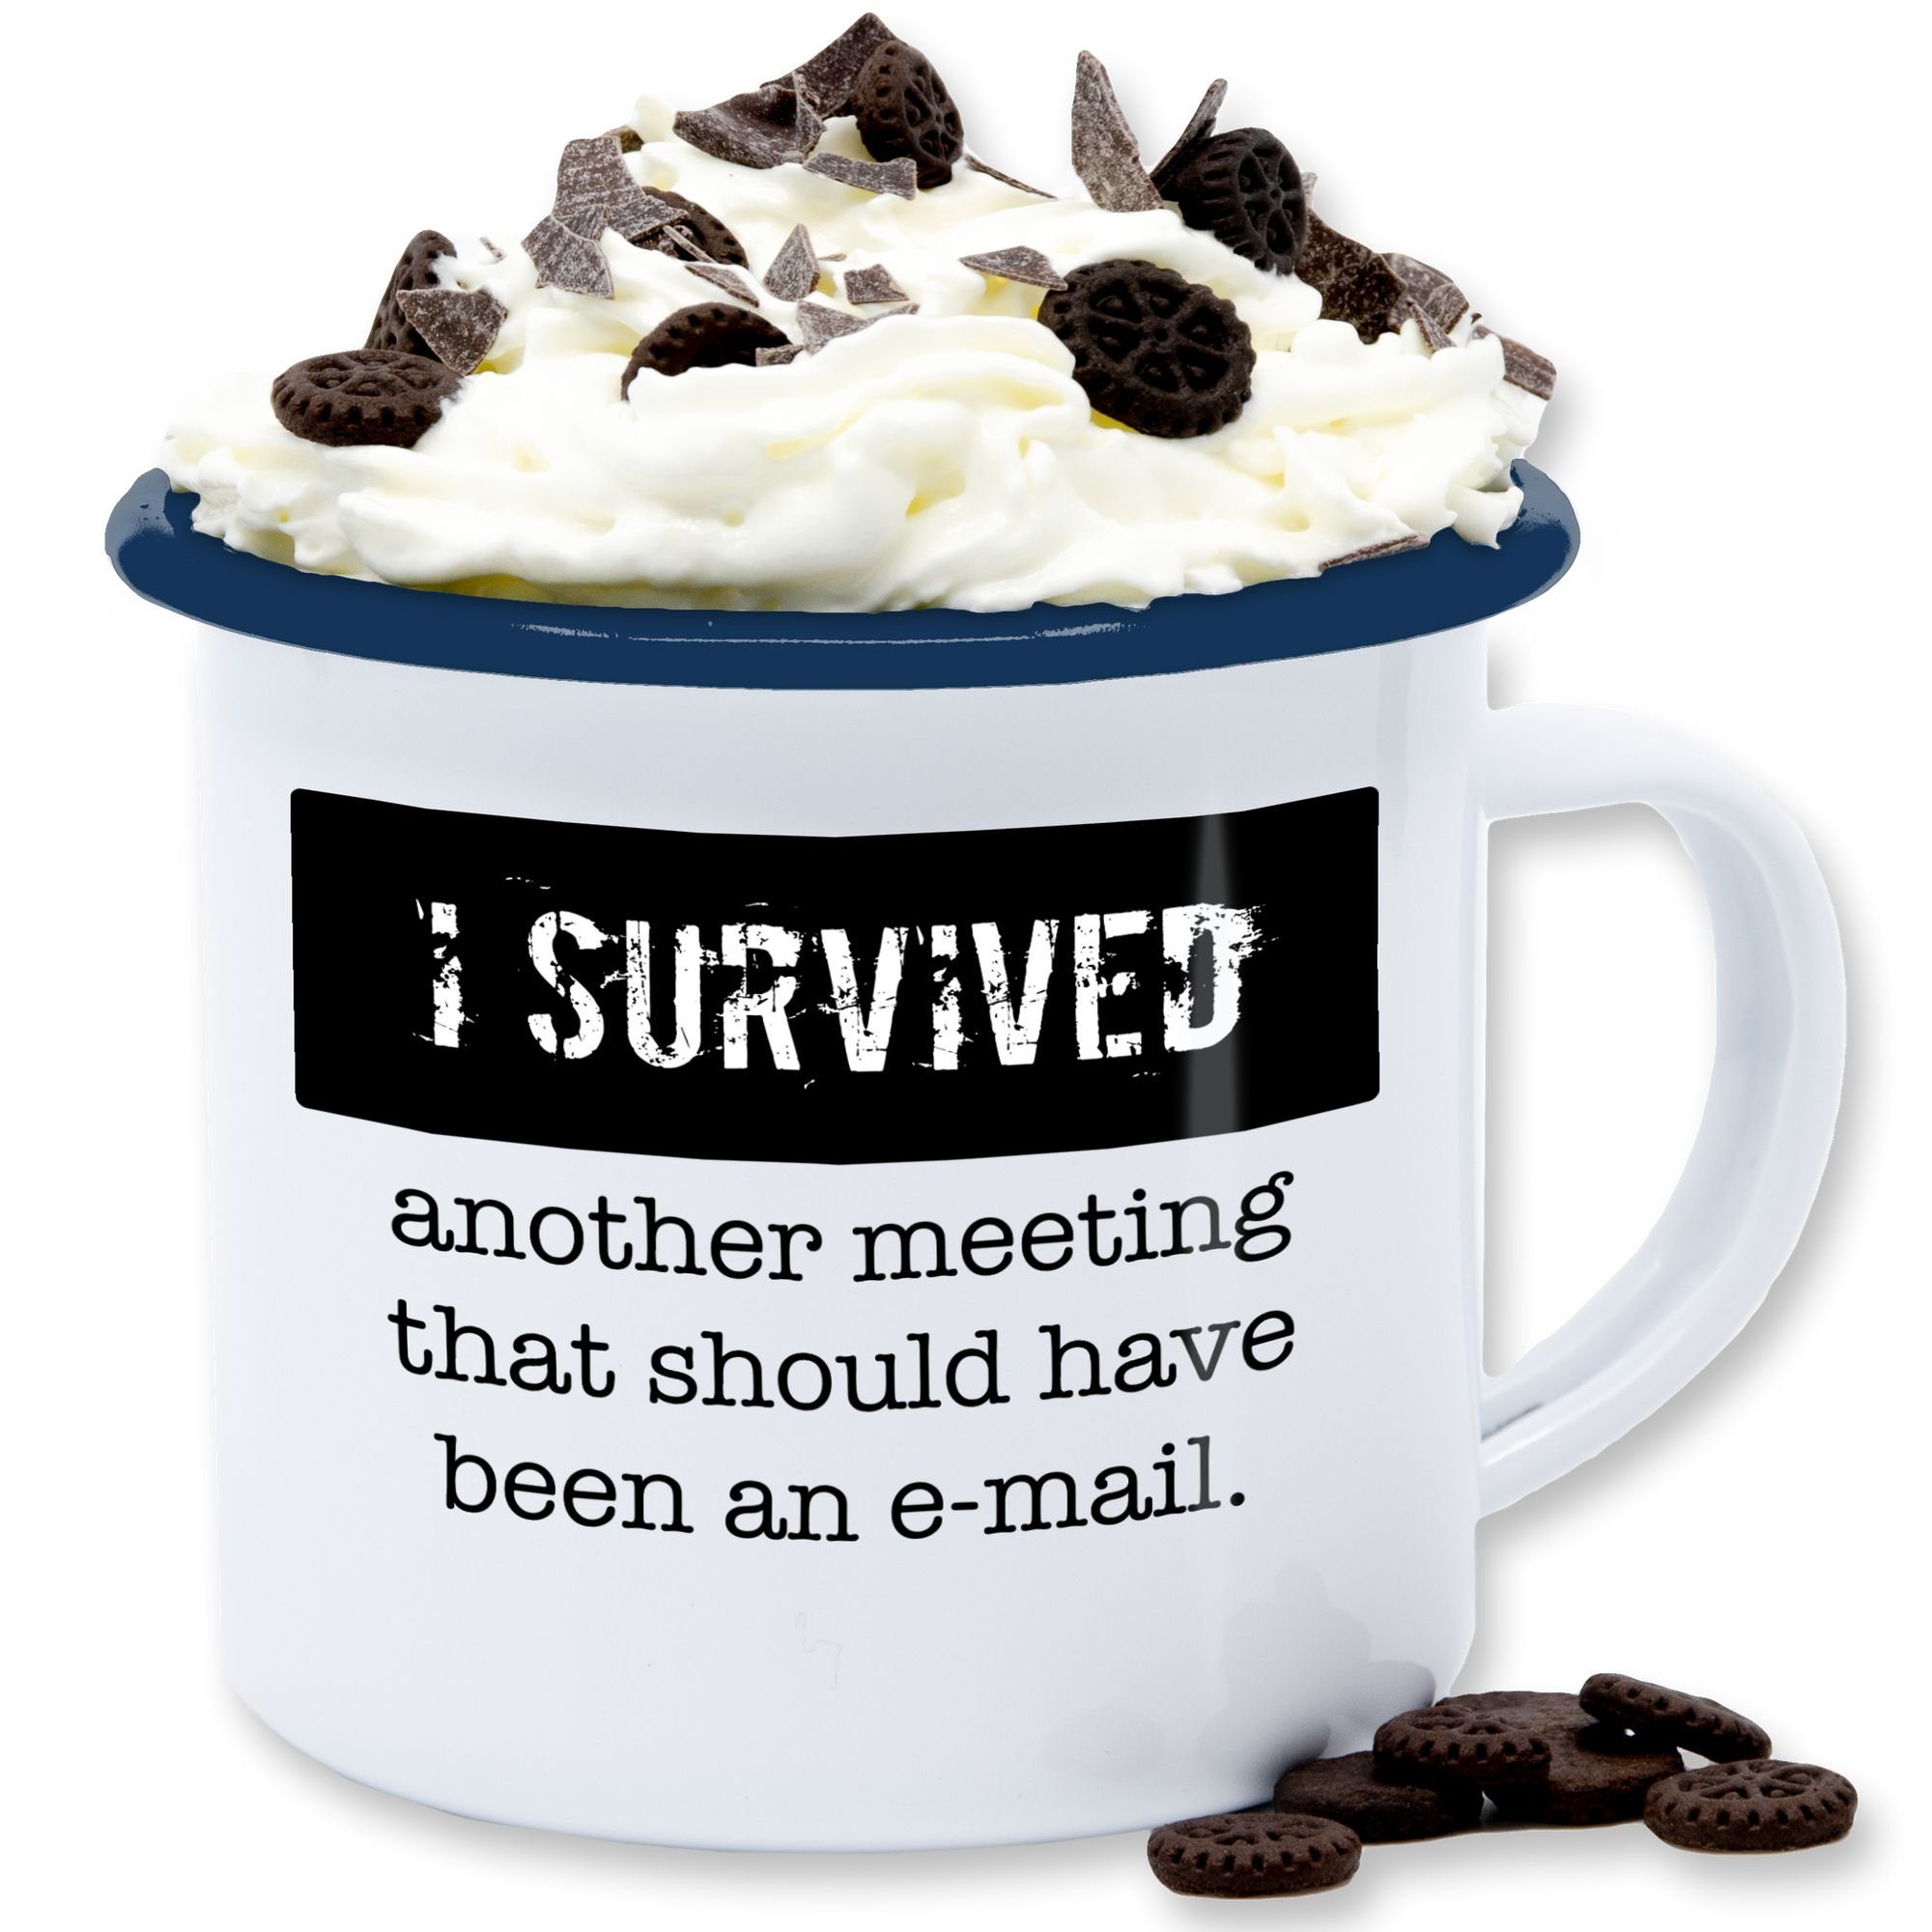 Shirtracer Tasse I survived another meeting, that should have been an e-mail, Stahlblech, Statement Sprüche 3 Weiß Blau